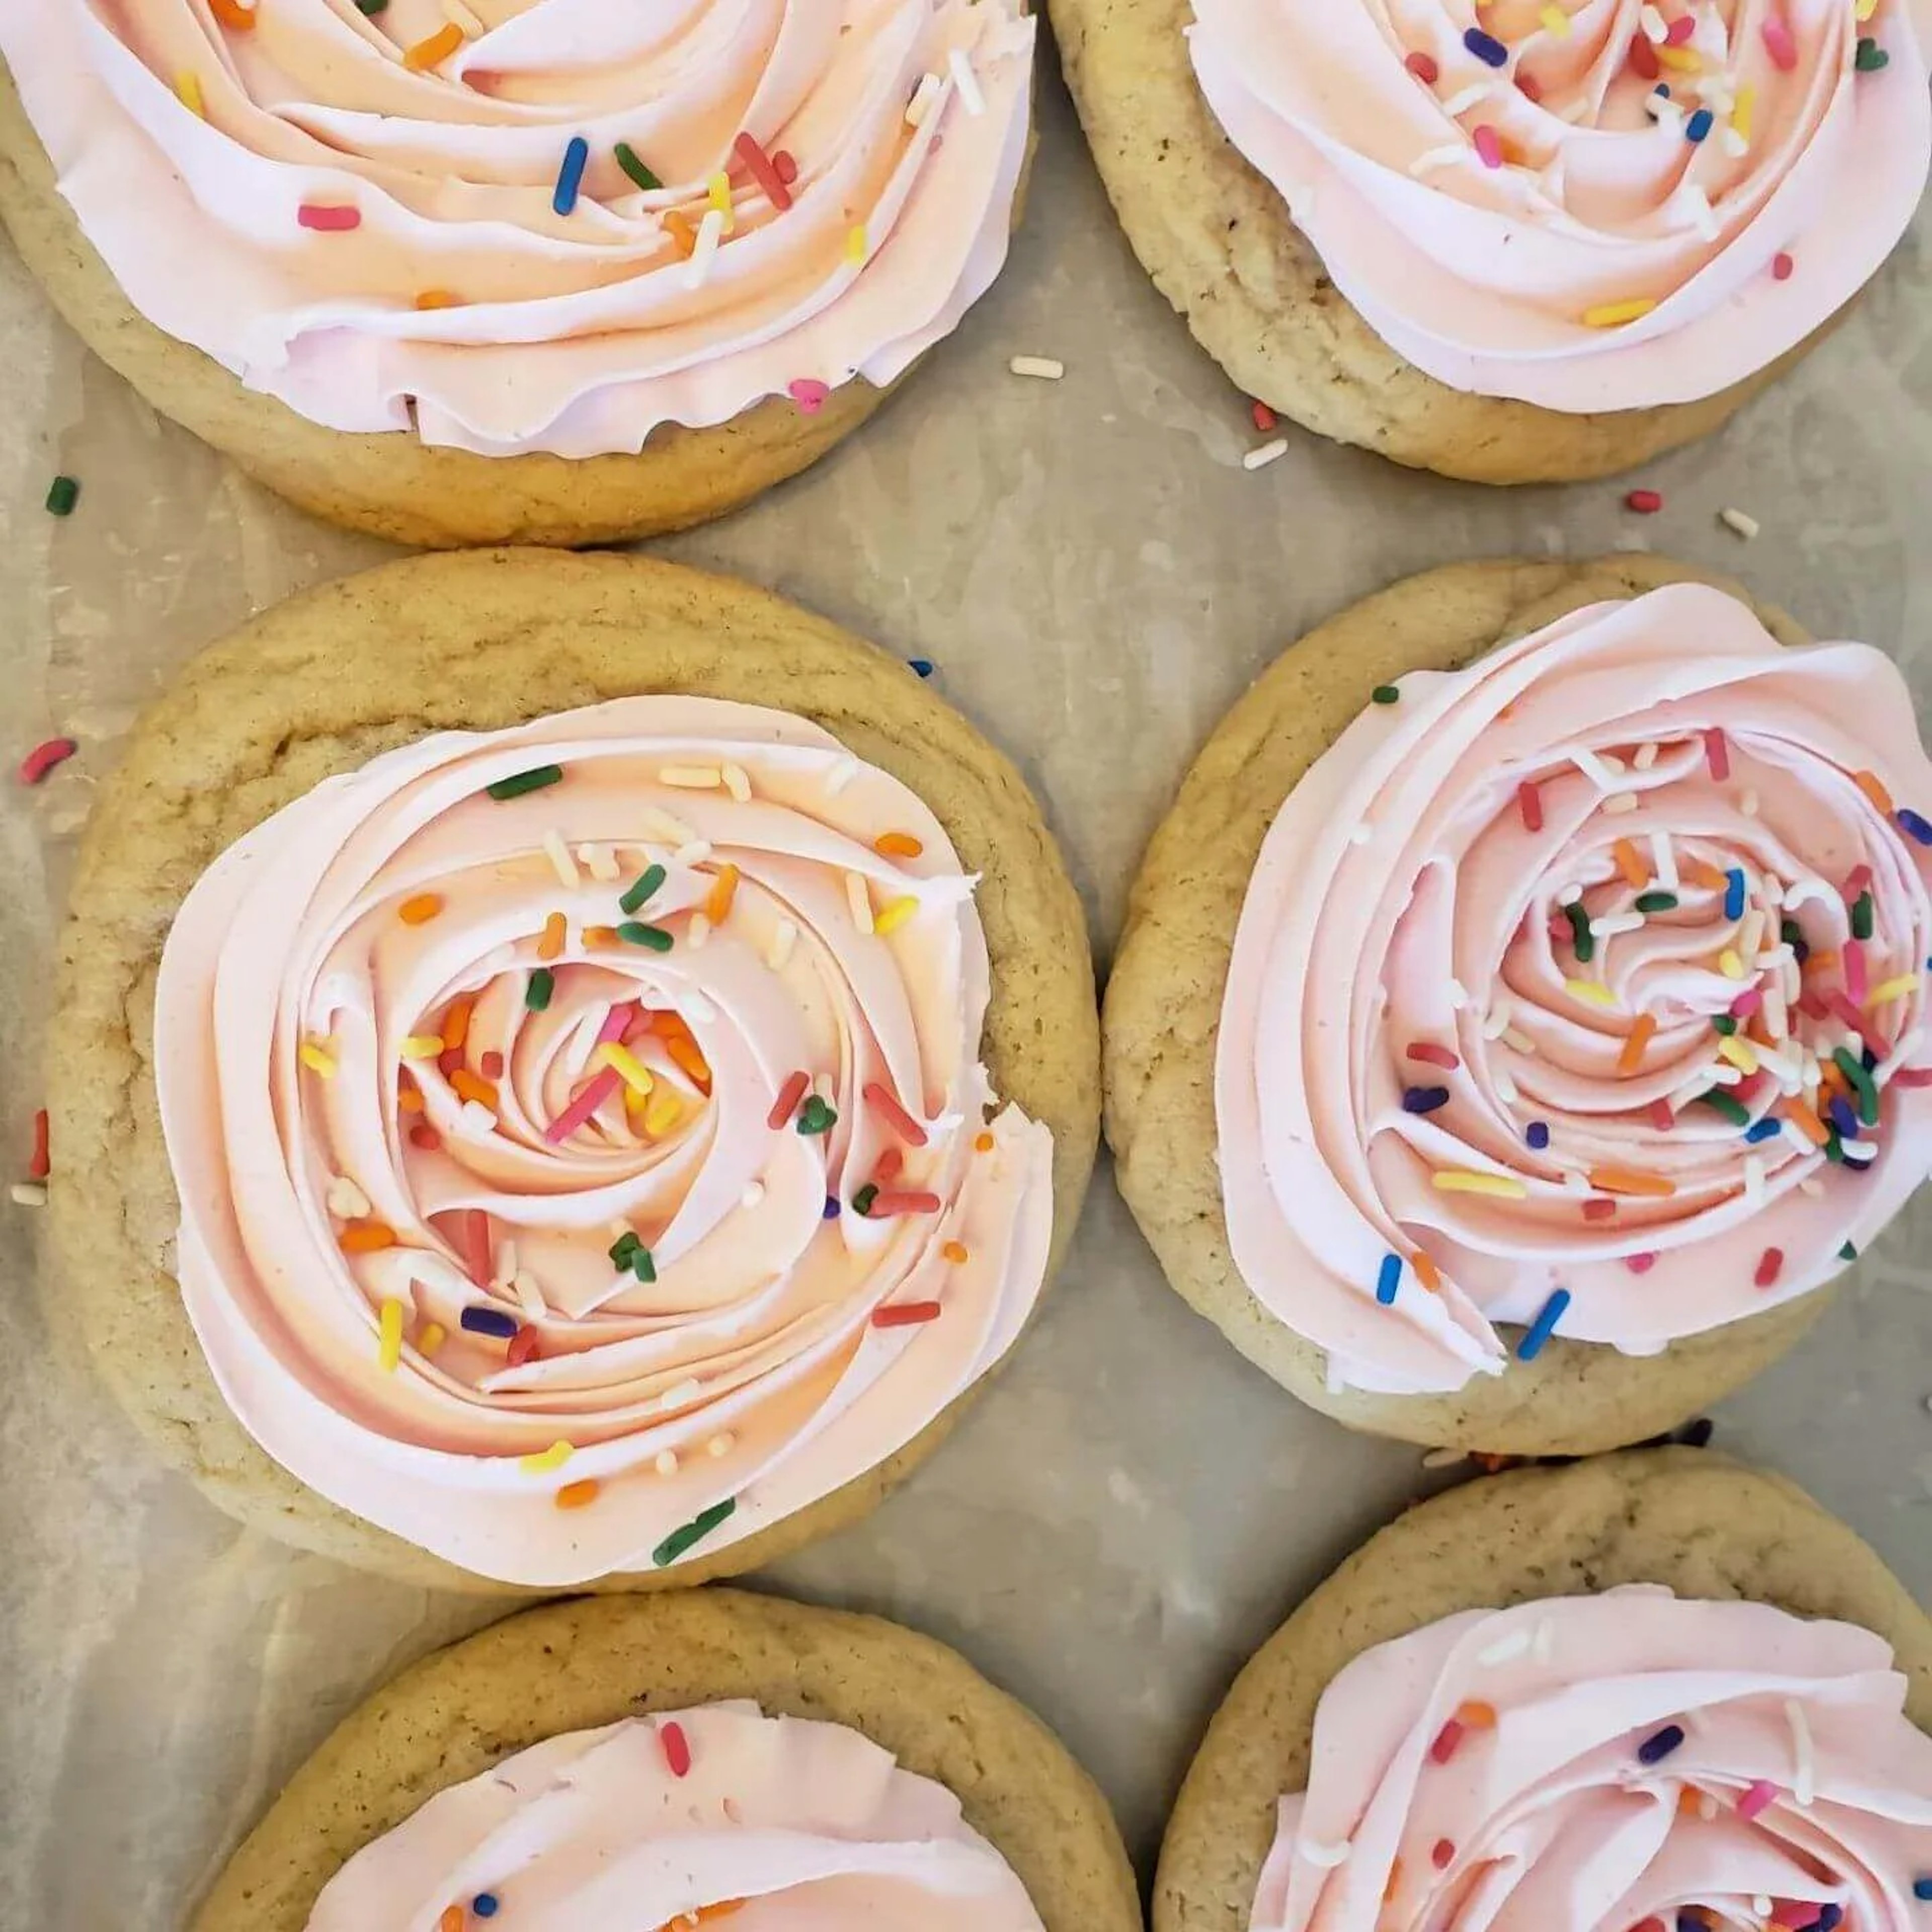 A batch of pink, frosted cookies with sprinkles.